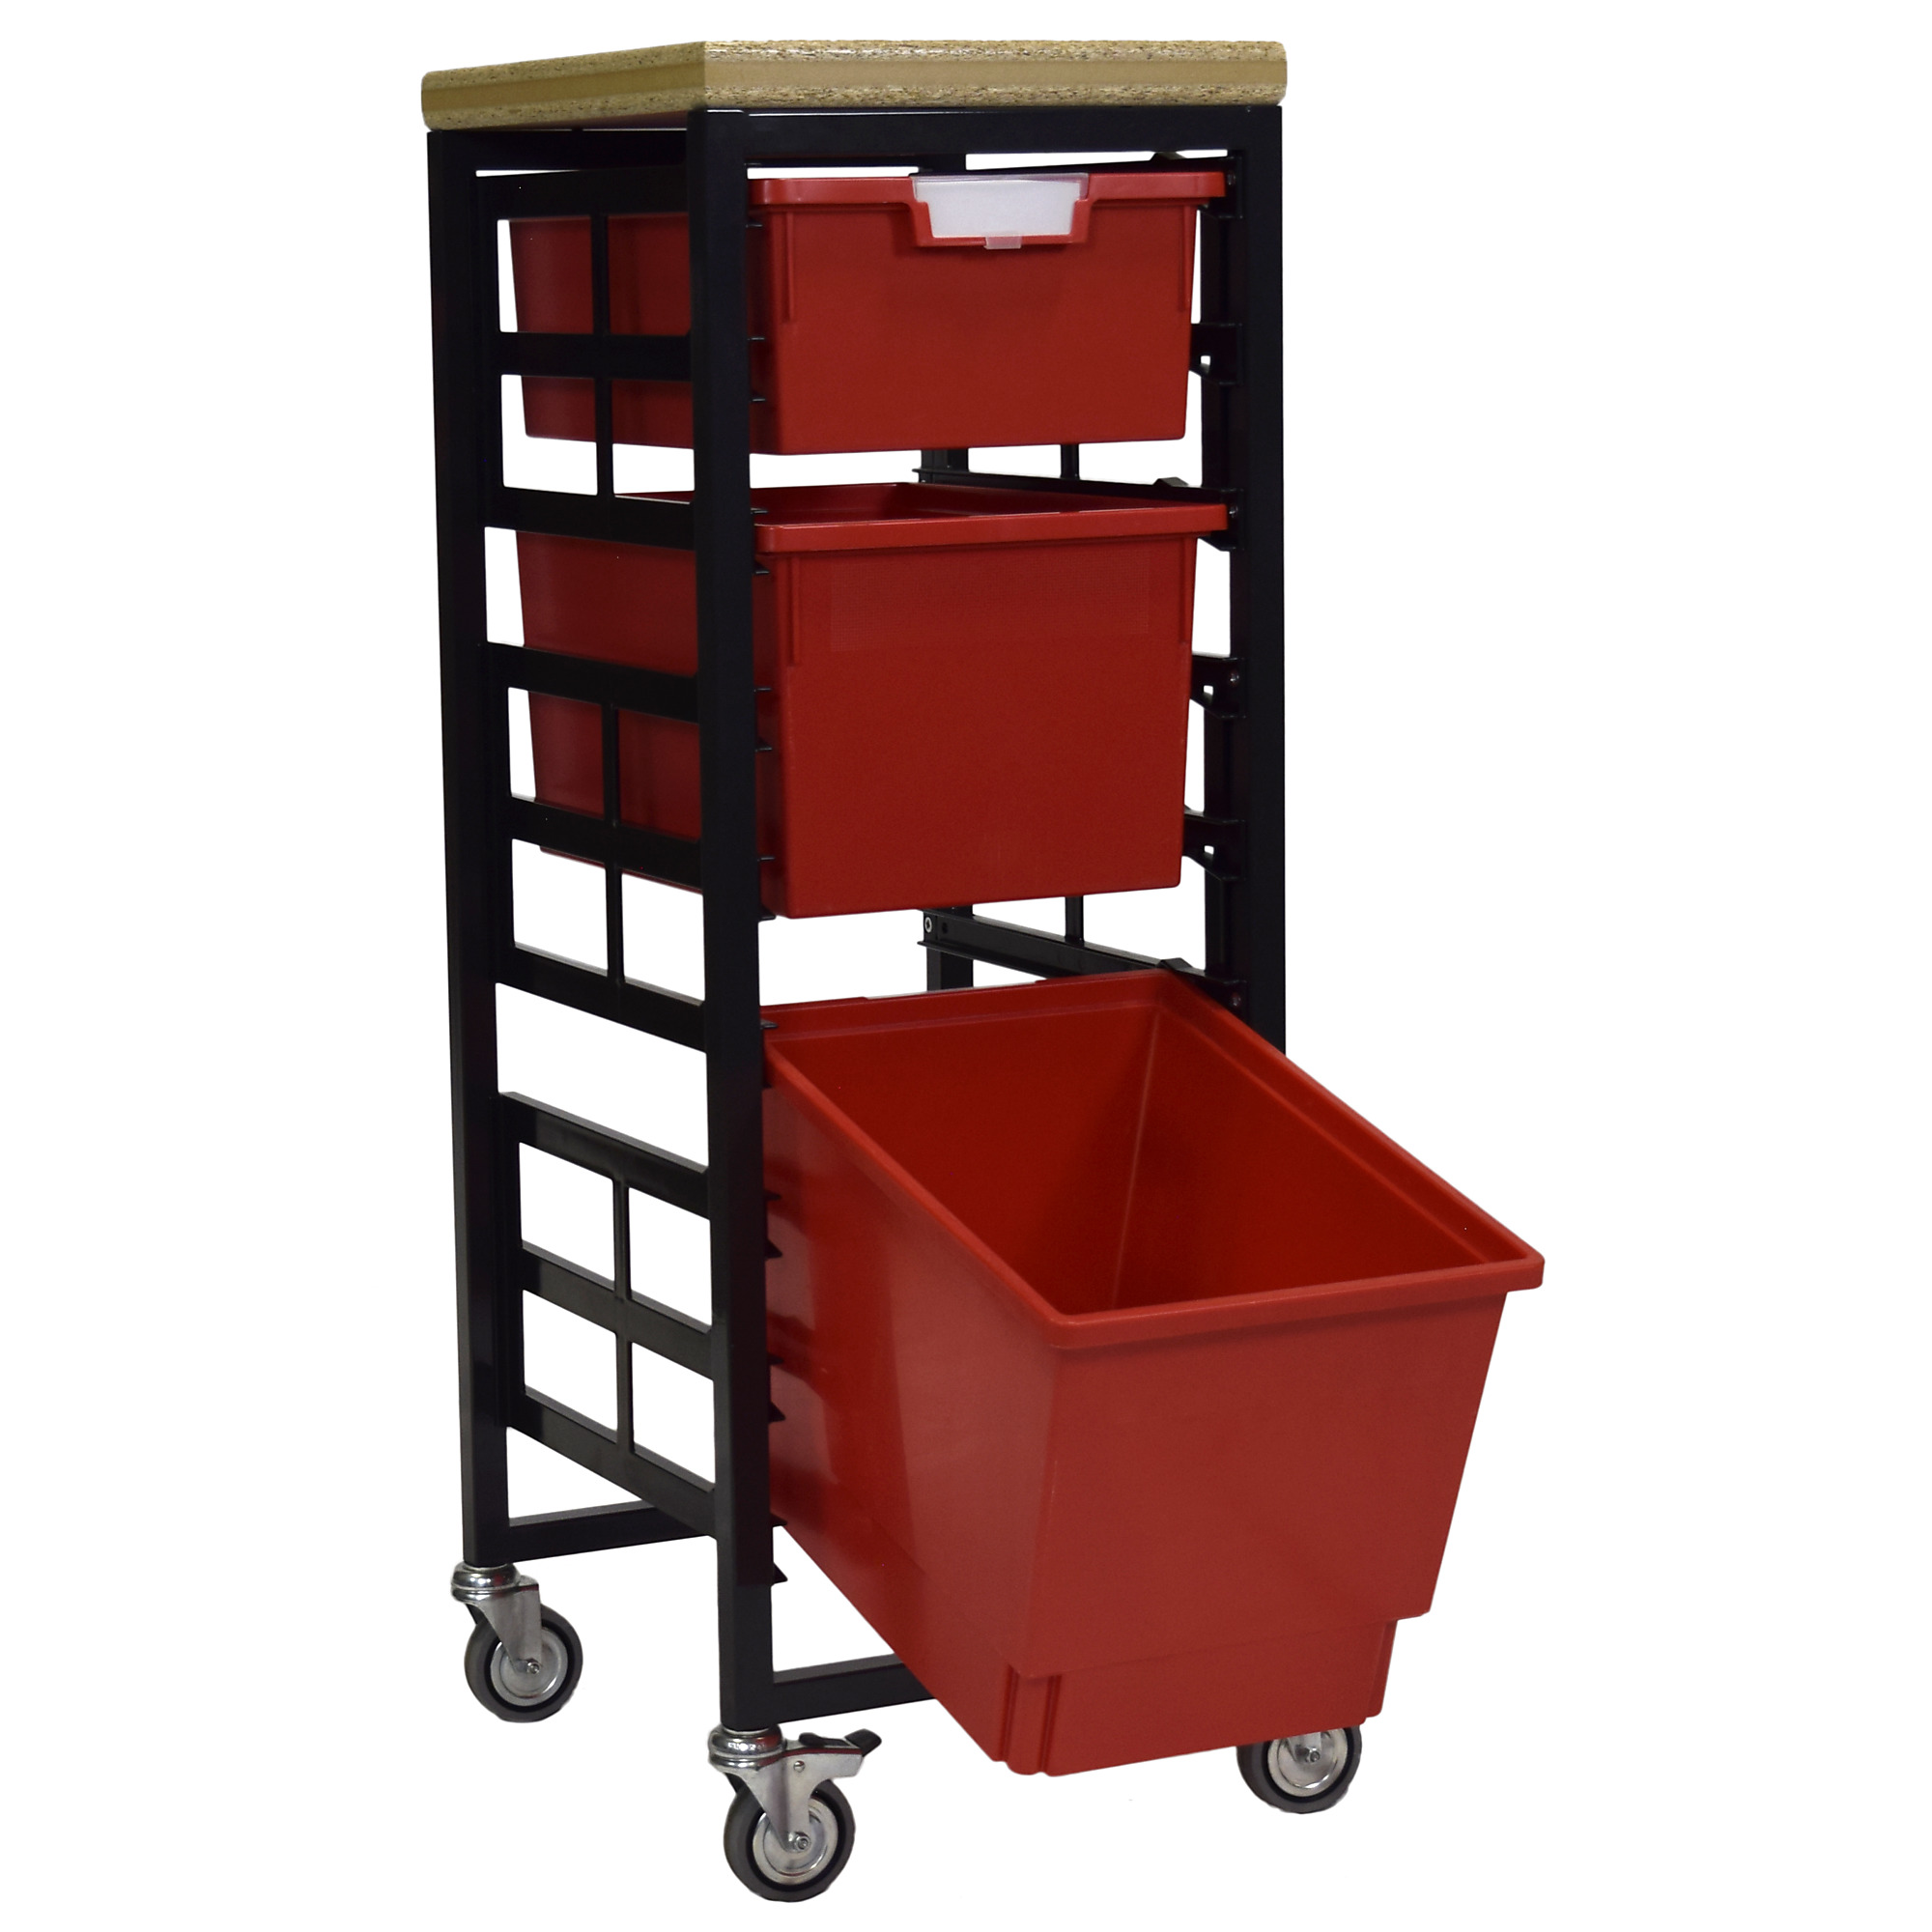 Certwood StorWerks, Mobile Work Station w/Wood Top -3 Trays-Red, Included (qty.) 3, Material Plastic, Height 3 in, Model CE2097DGGC-1D1T1QPR